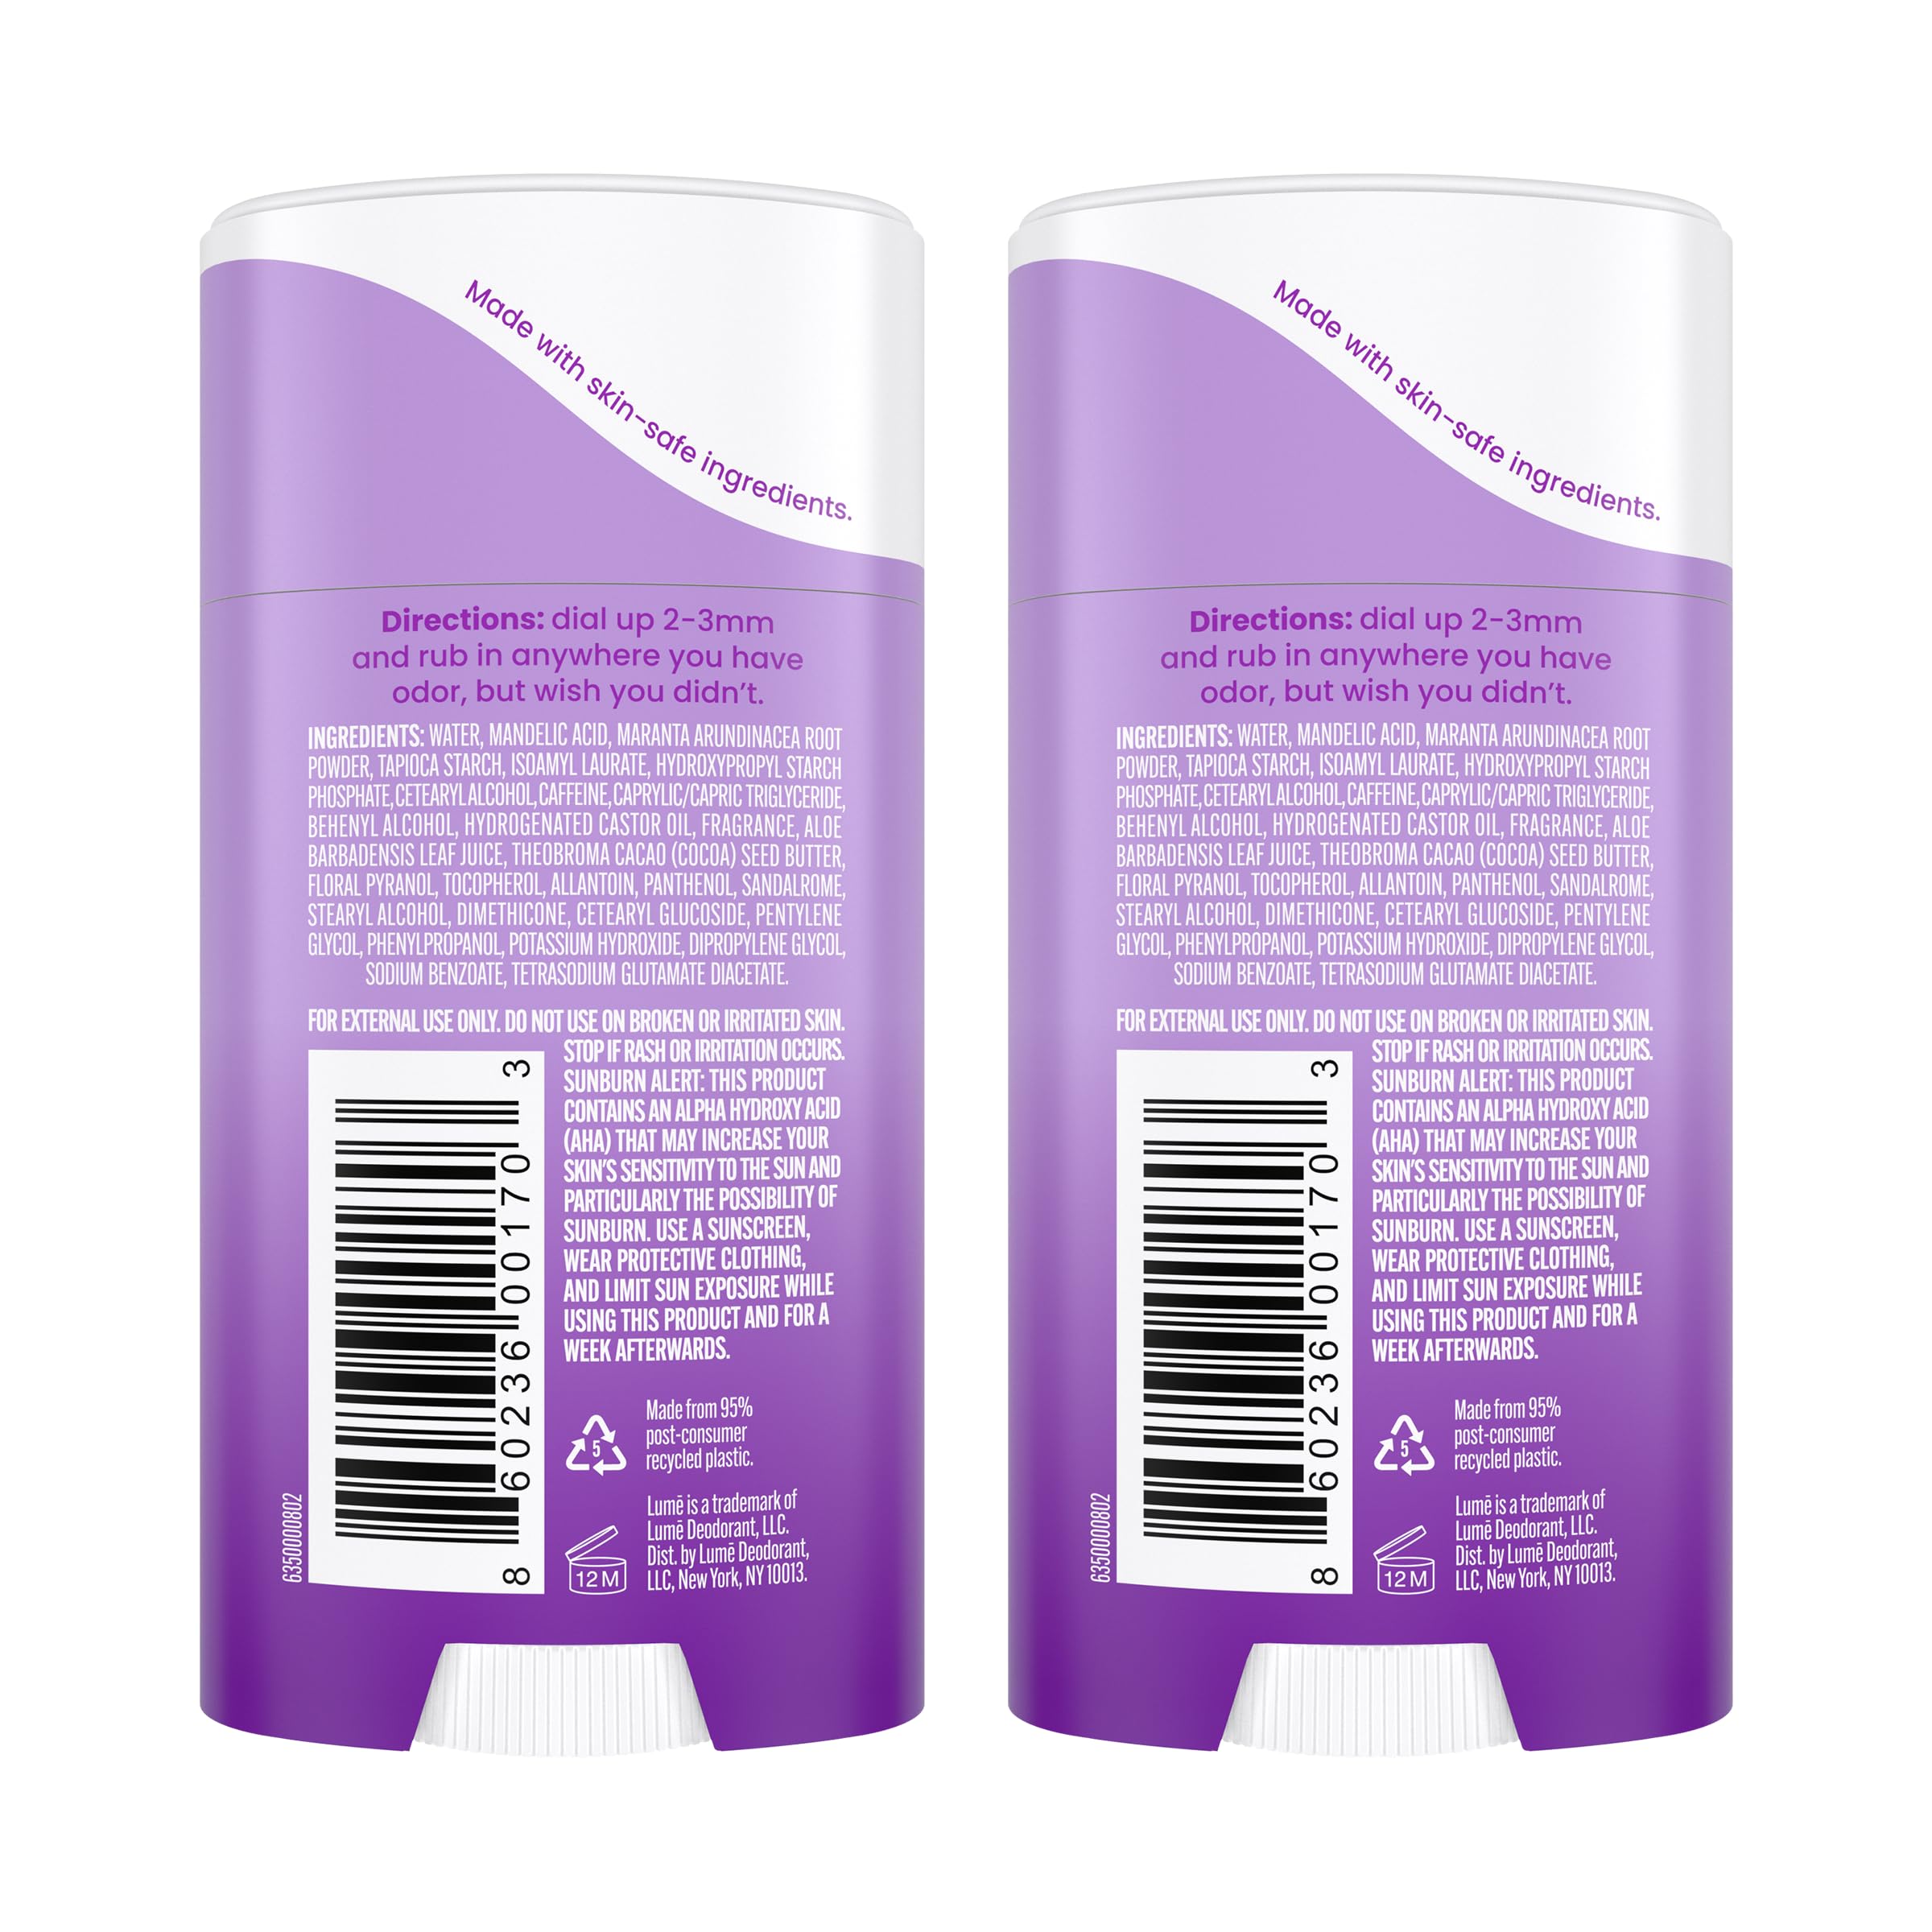 Lume Deodorant Cream Stick - Underarms and Private Parts - Aluminum-Free, Baking Soda-Free, Hypoallergenic, and Safe For Sensitive Skin - 2.2 Ounce Two-Pack (Lavender Sage)